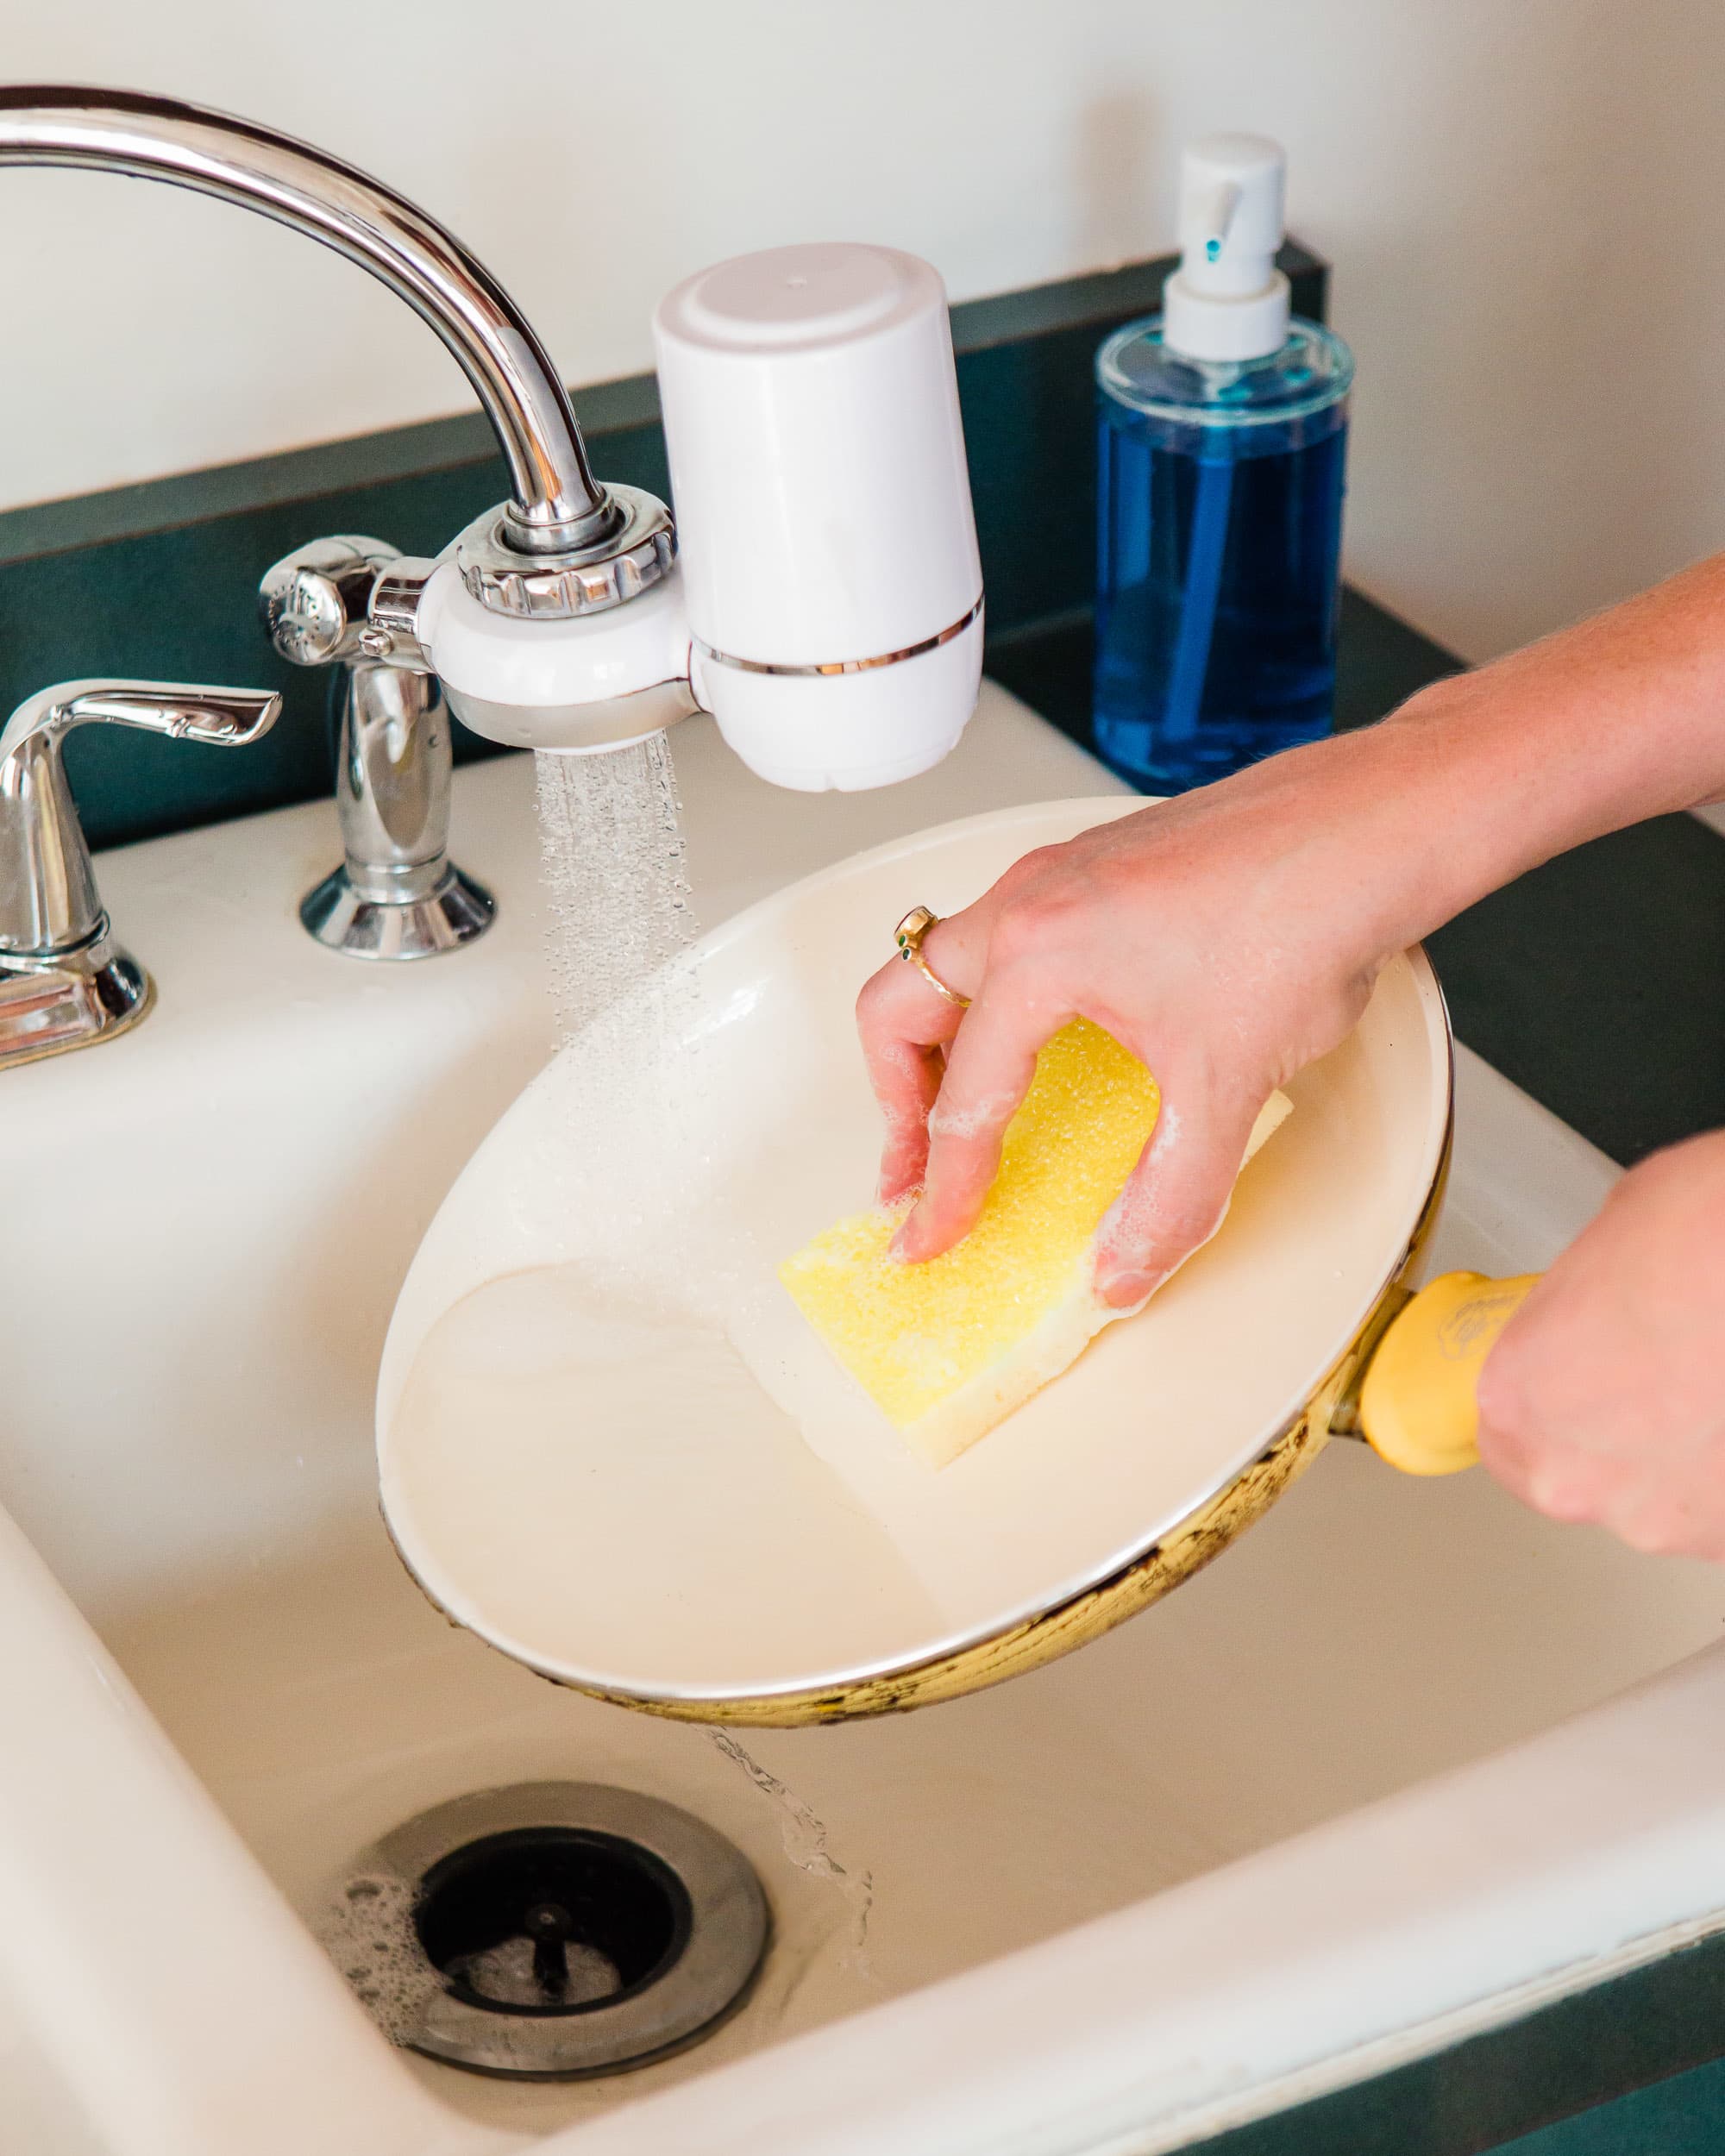 https://cdn.apartmenttherapy.info/image/upload/v1656633652/k/Photo/Lifestyle/2022-07-How-to-Clean-a%20Ceramic-Nonstick-Pan/cleaning-ceramic-pan-4.jpg